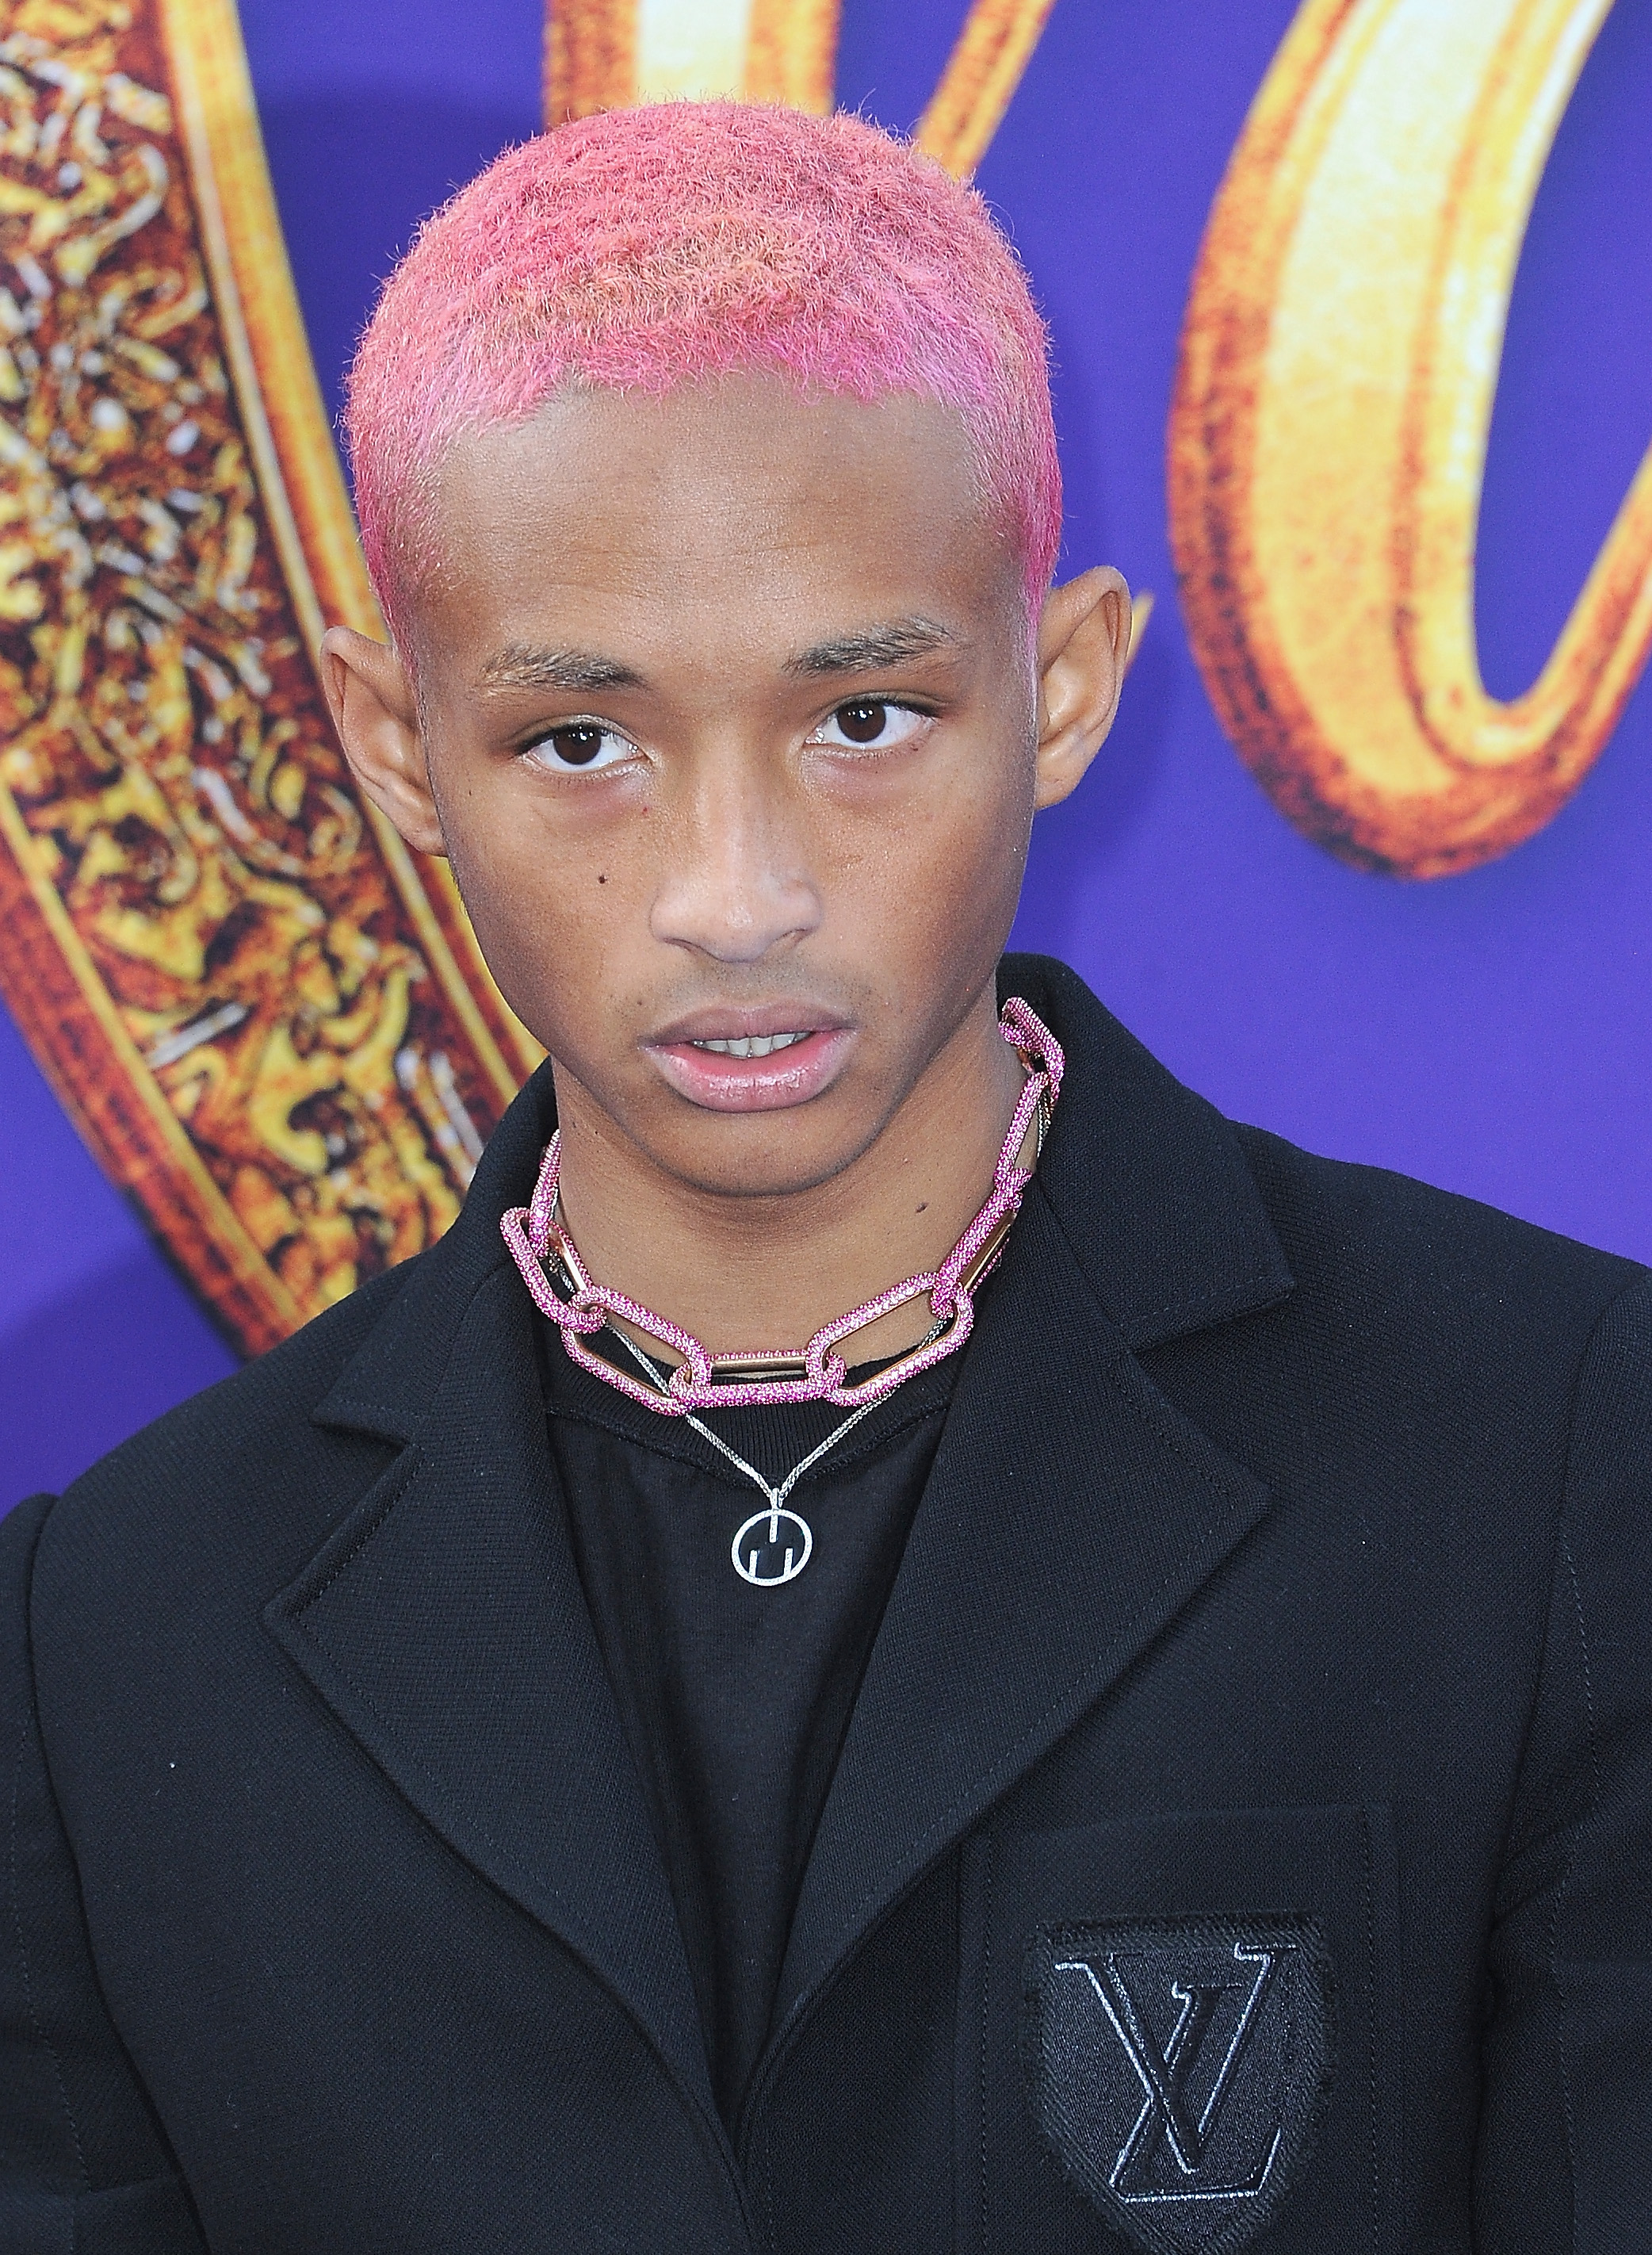 Jaden Smith On Social Media: Even If You Have No Followers On Instagram,  You Have Power.